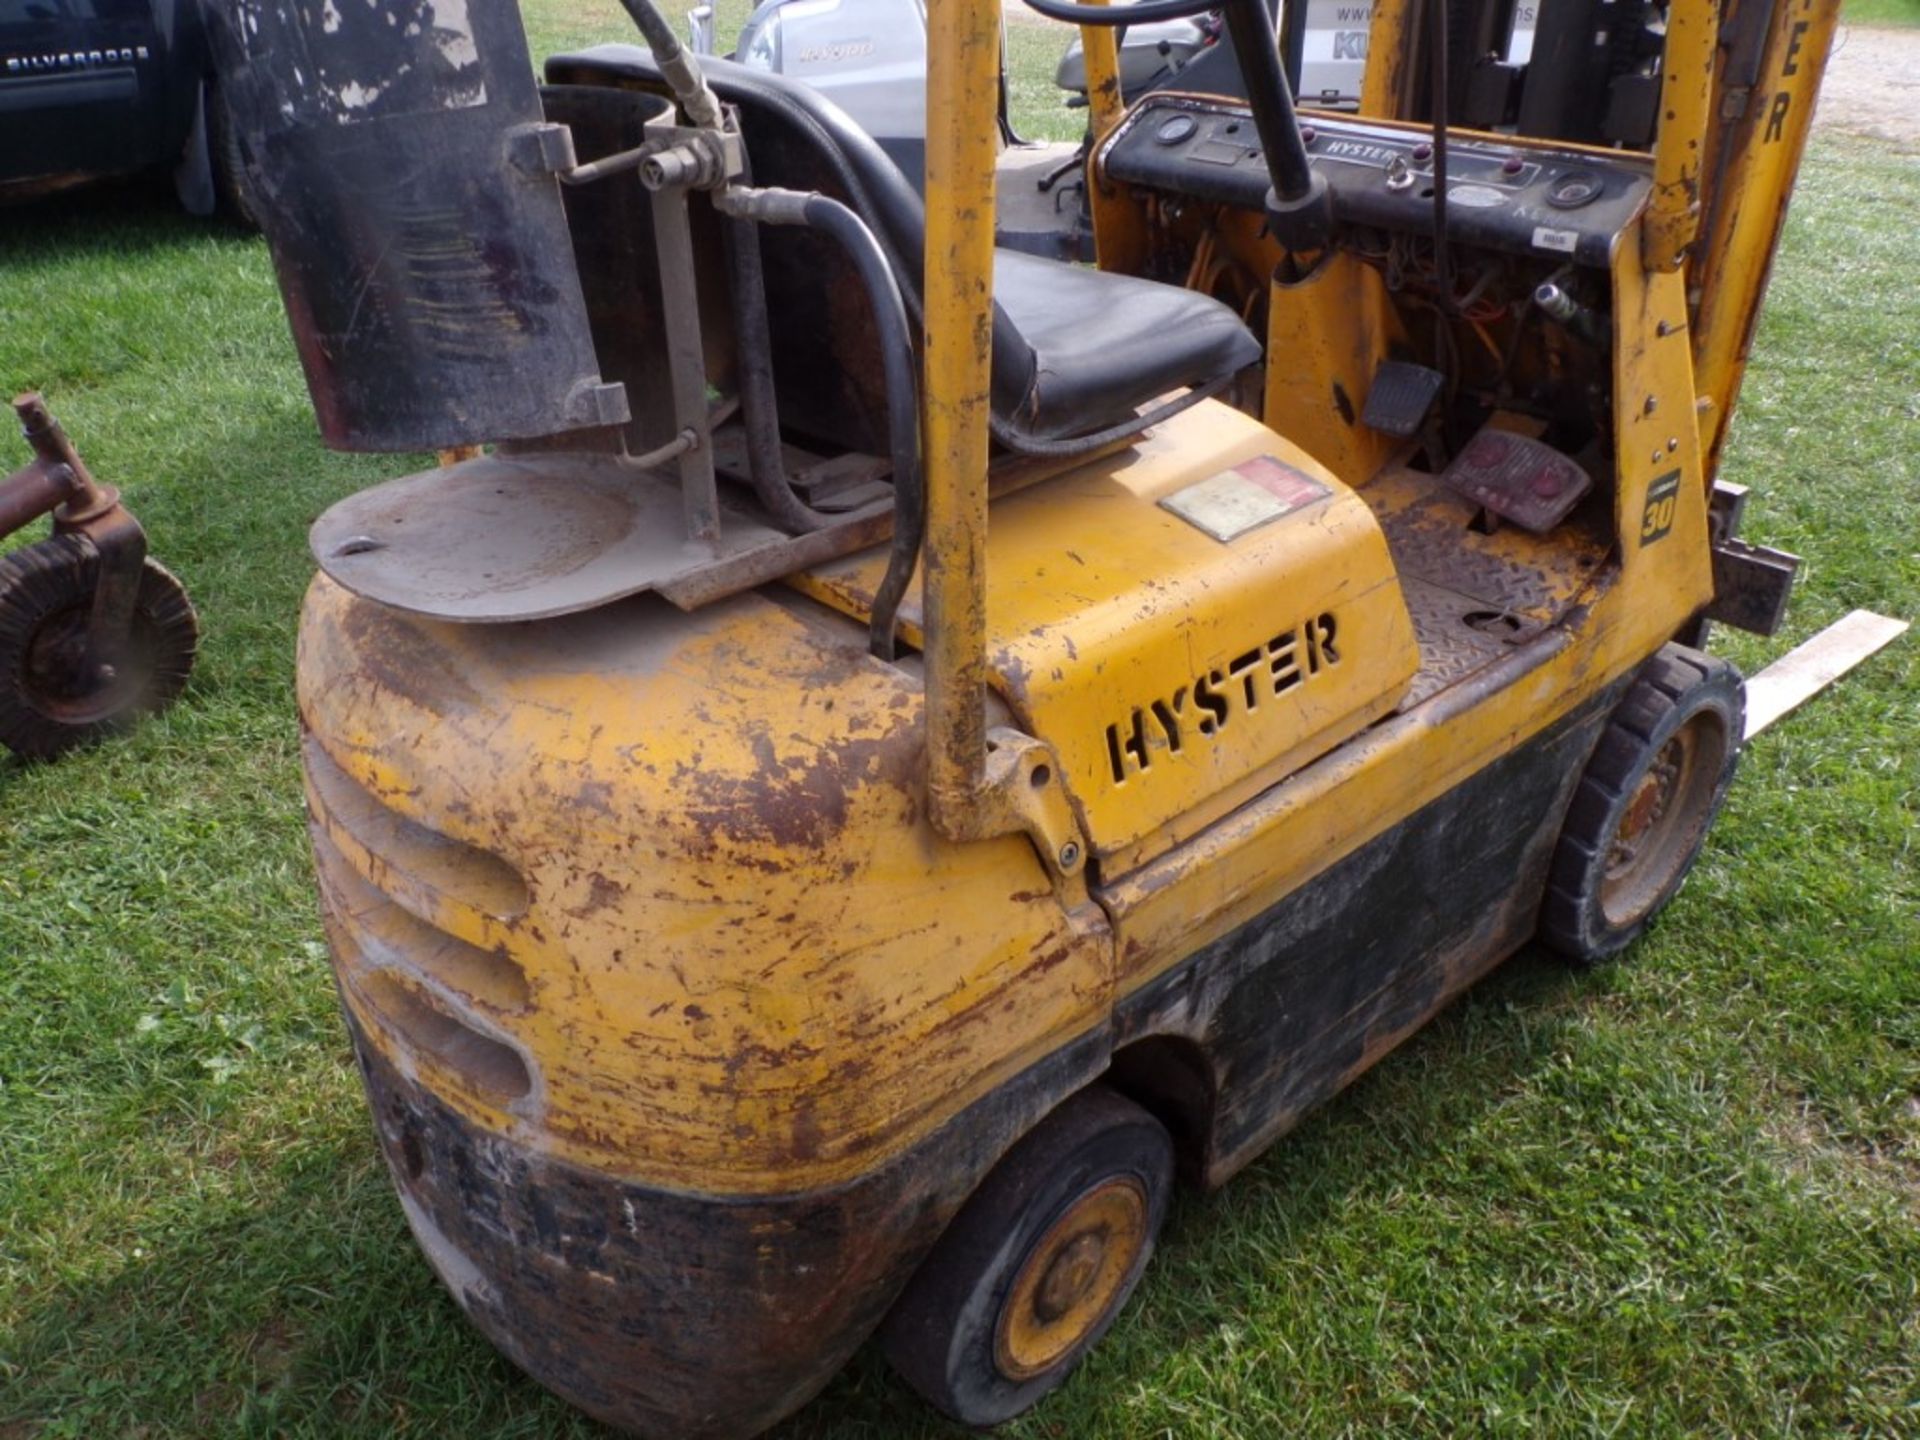 Hyster Space Saver, Model 530A, S/N A0101D15860, Propane Forklift, No Tank (6108) - Image 3 of 3